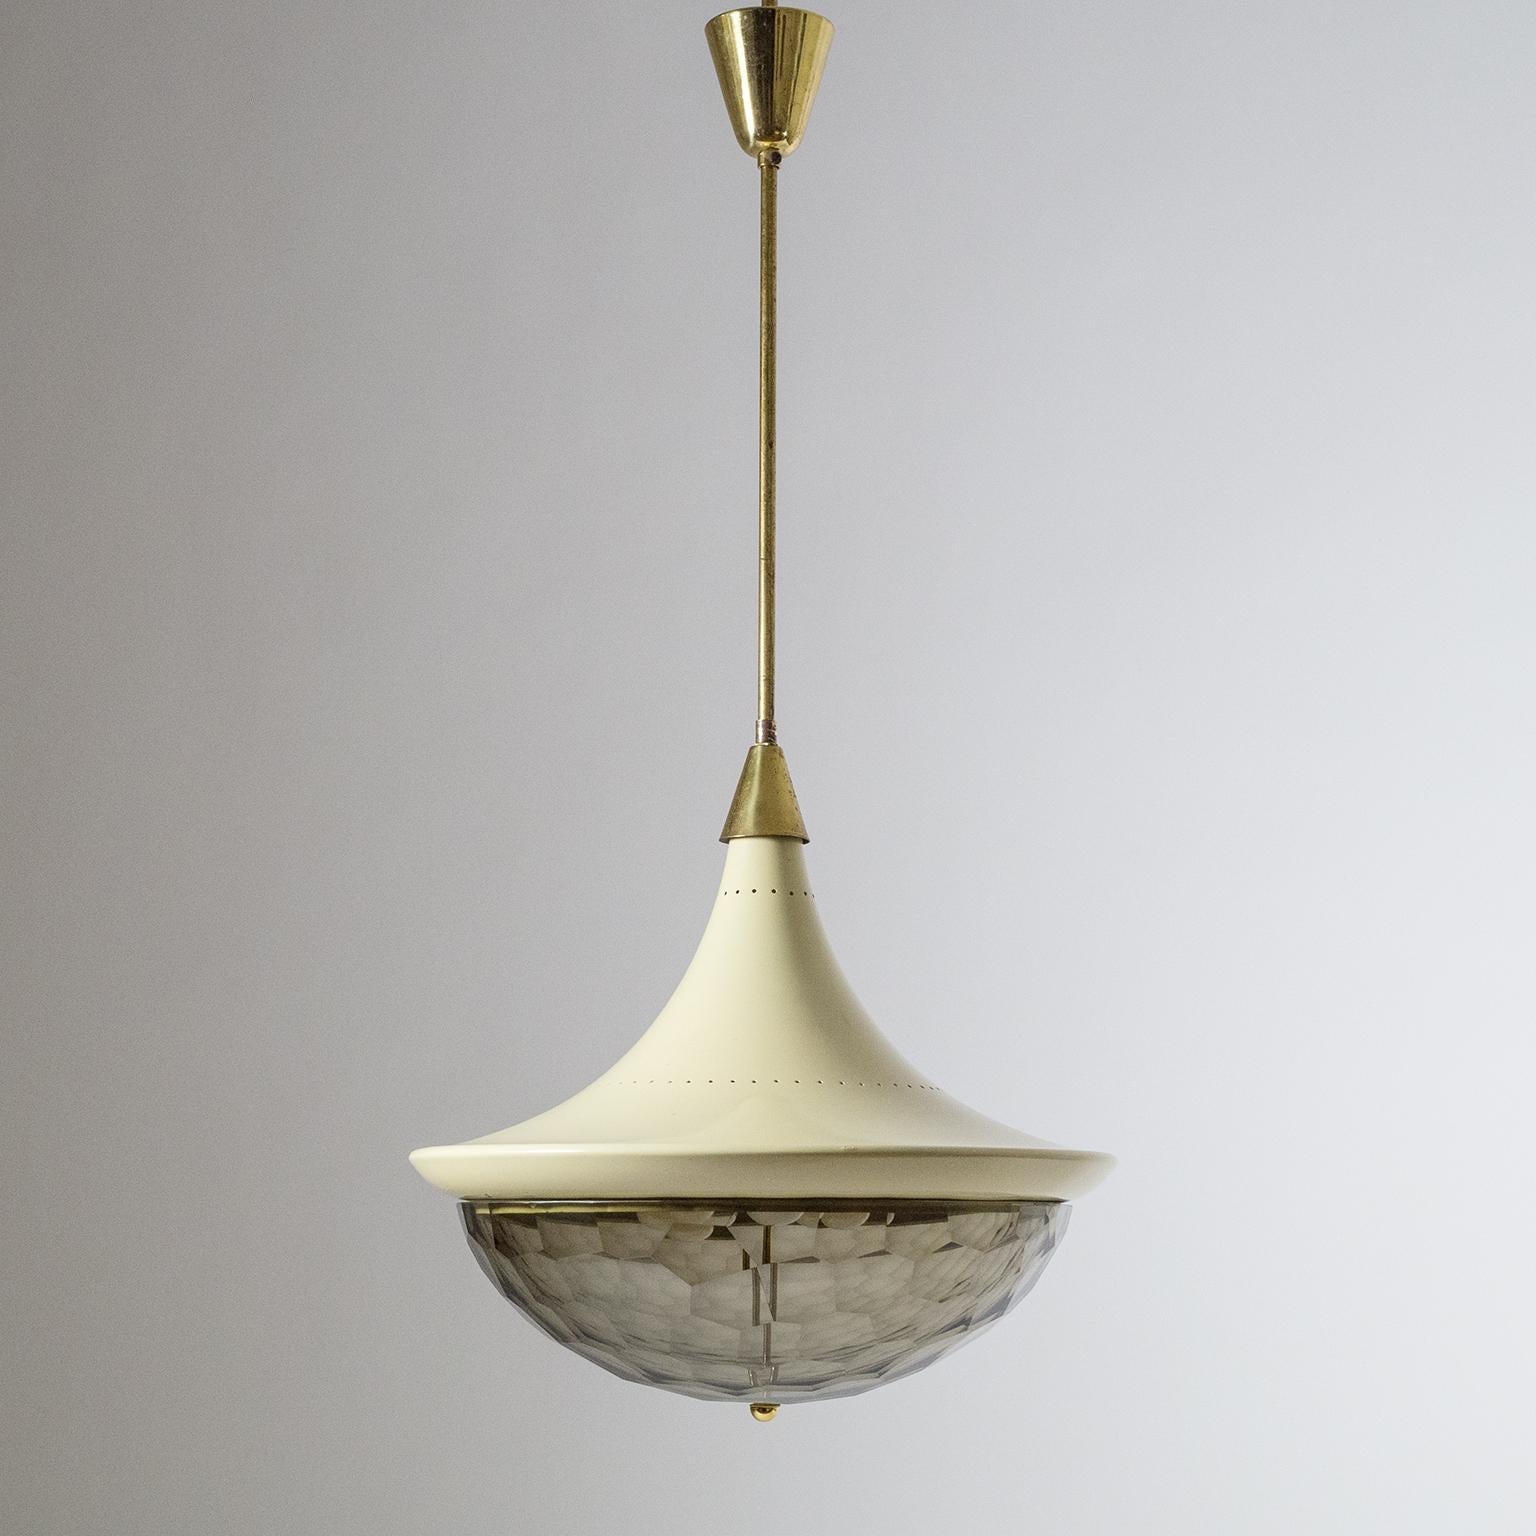 Very unique Italian midcentury chandelier, circa 1960. A large pagoda-shaped body with a multi-faceted smoked glass diffuser. Very nice original condition with patina on the brass and light wear to the original lacquer and glass. Three brass and